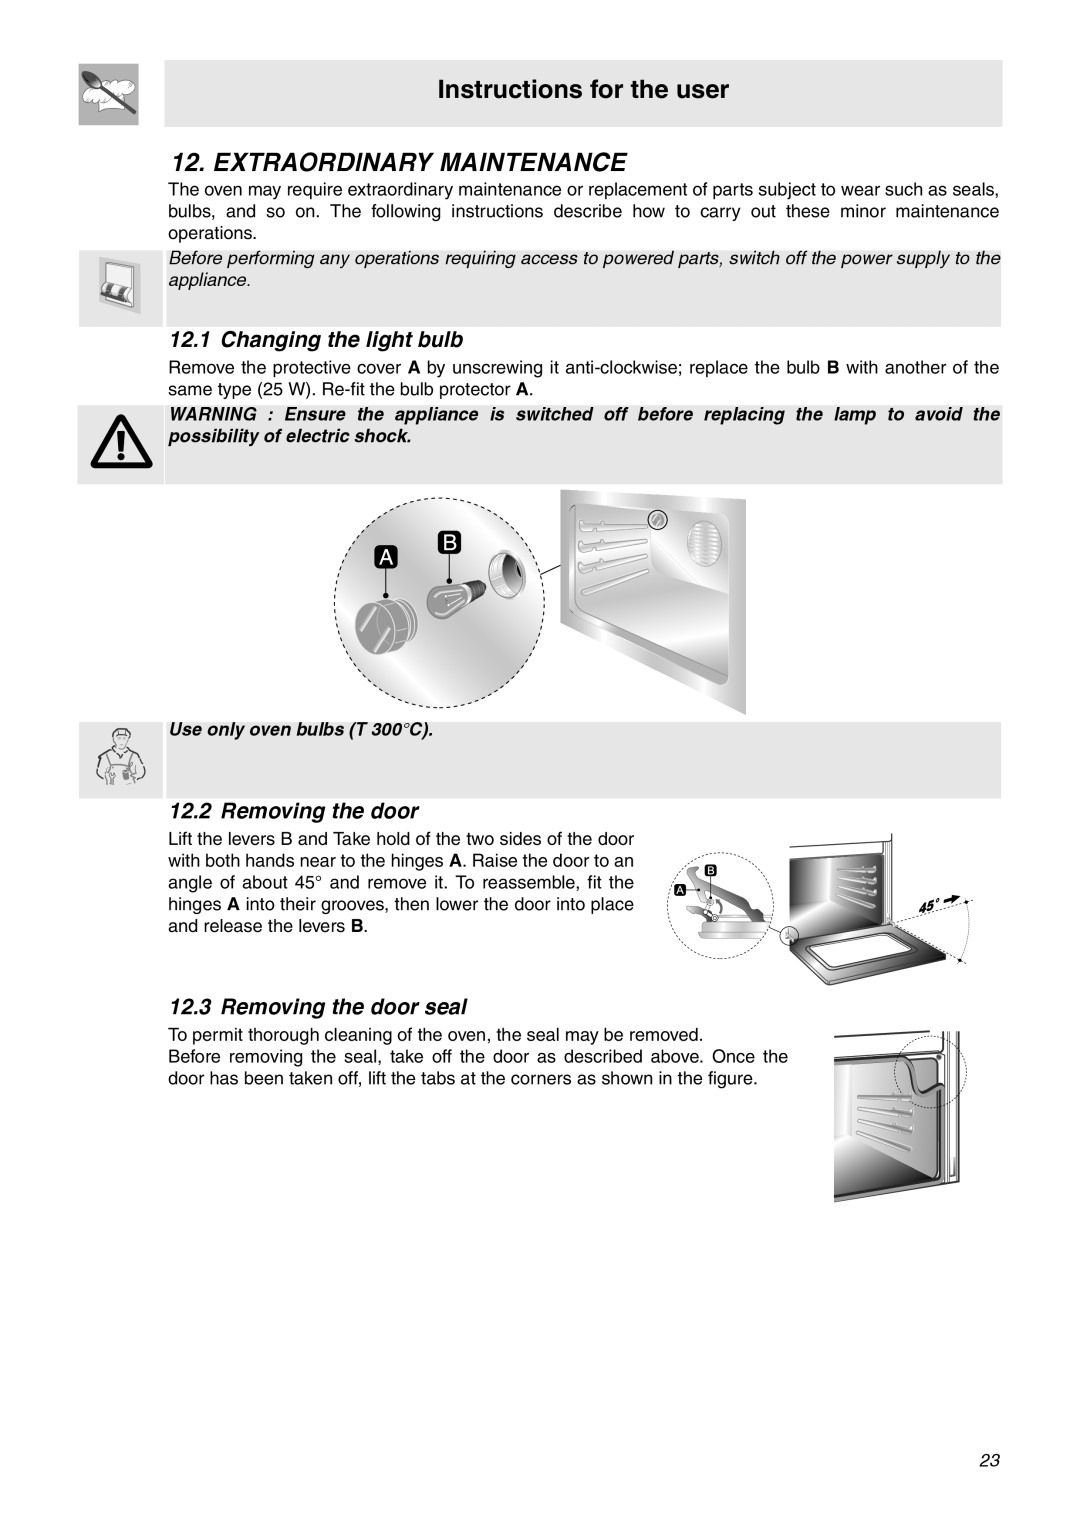 Smeg C9GMXA Extraordinary Maintenance, Changing the light bulb, Removing the door seal, Instructions for the user 